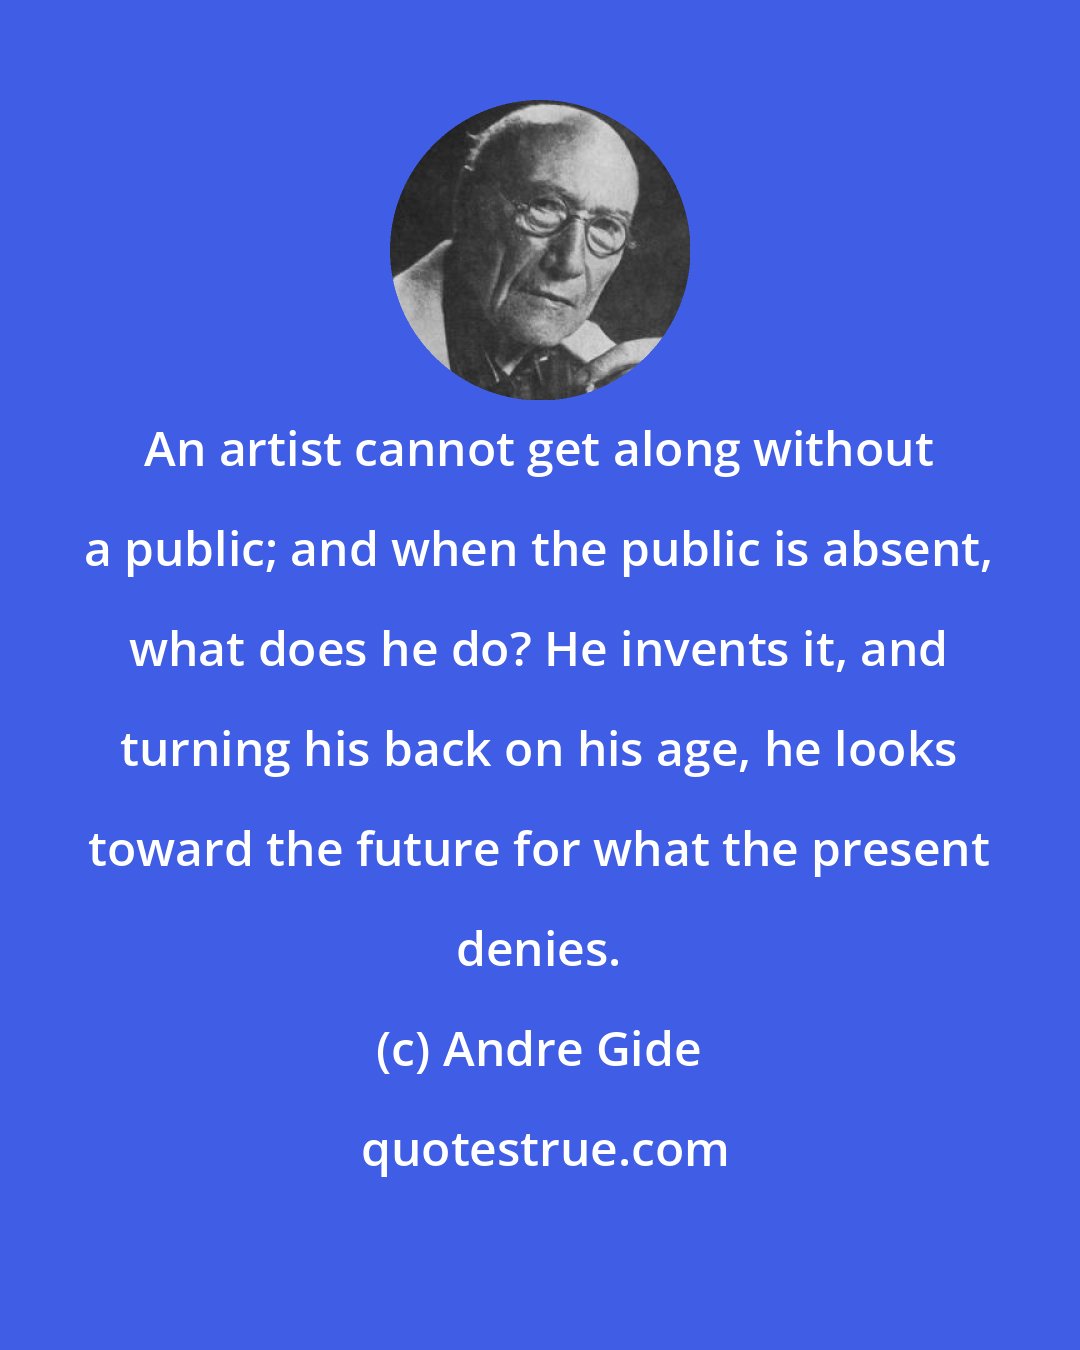 Andre Gide: An artist cannot get along without a public; and when the public is absent, what does he do? He invents it, and turning his back on his age, he looks toward the future for what the present denies.